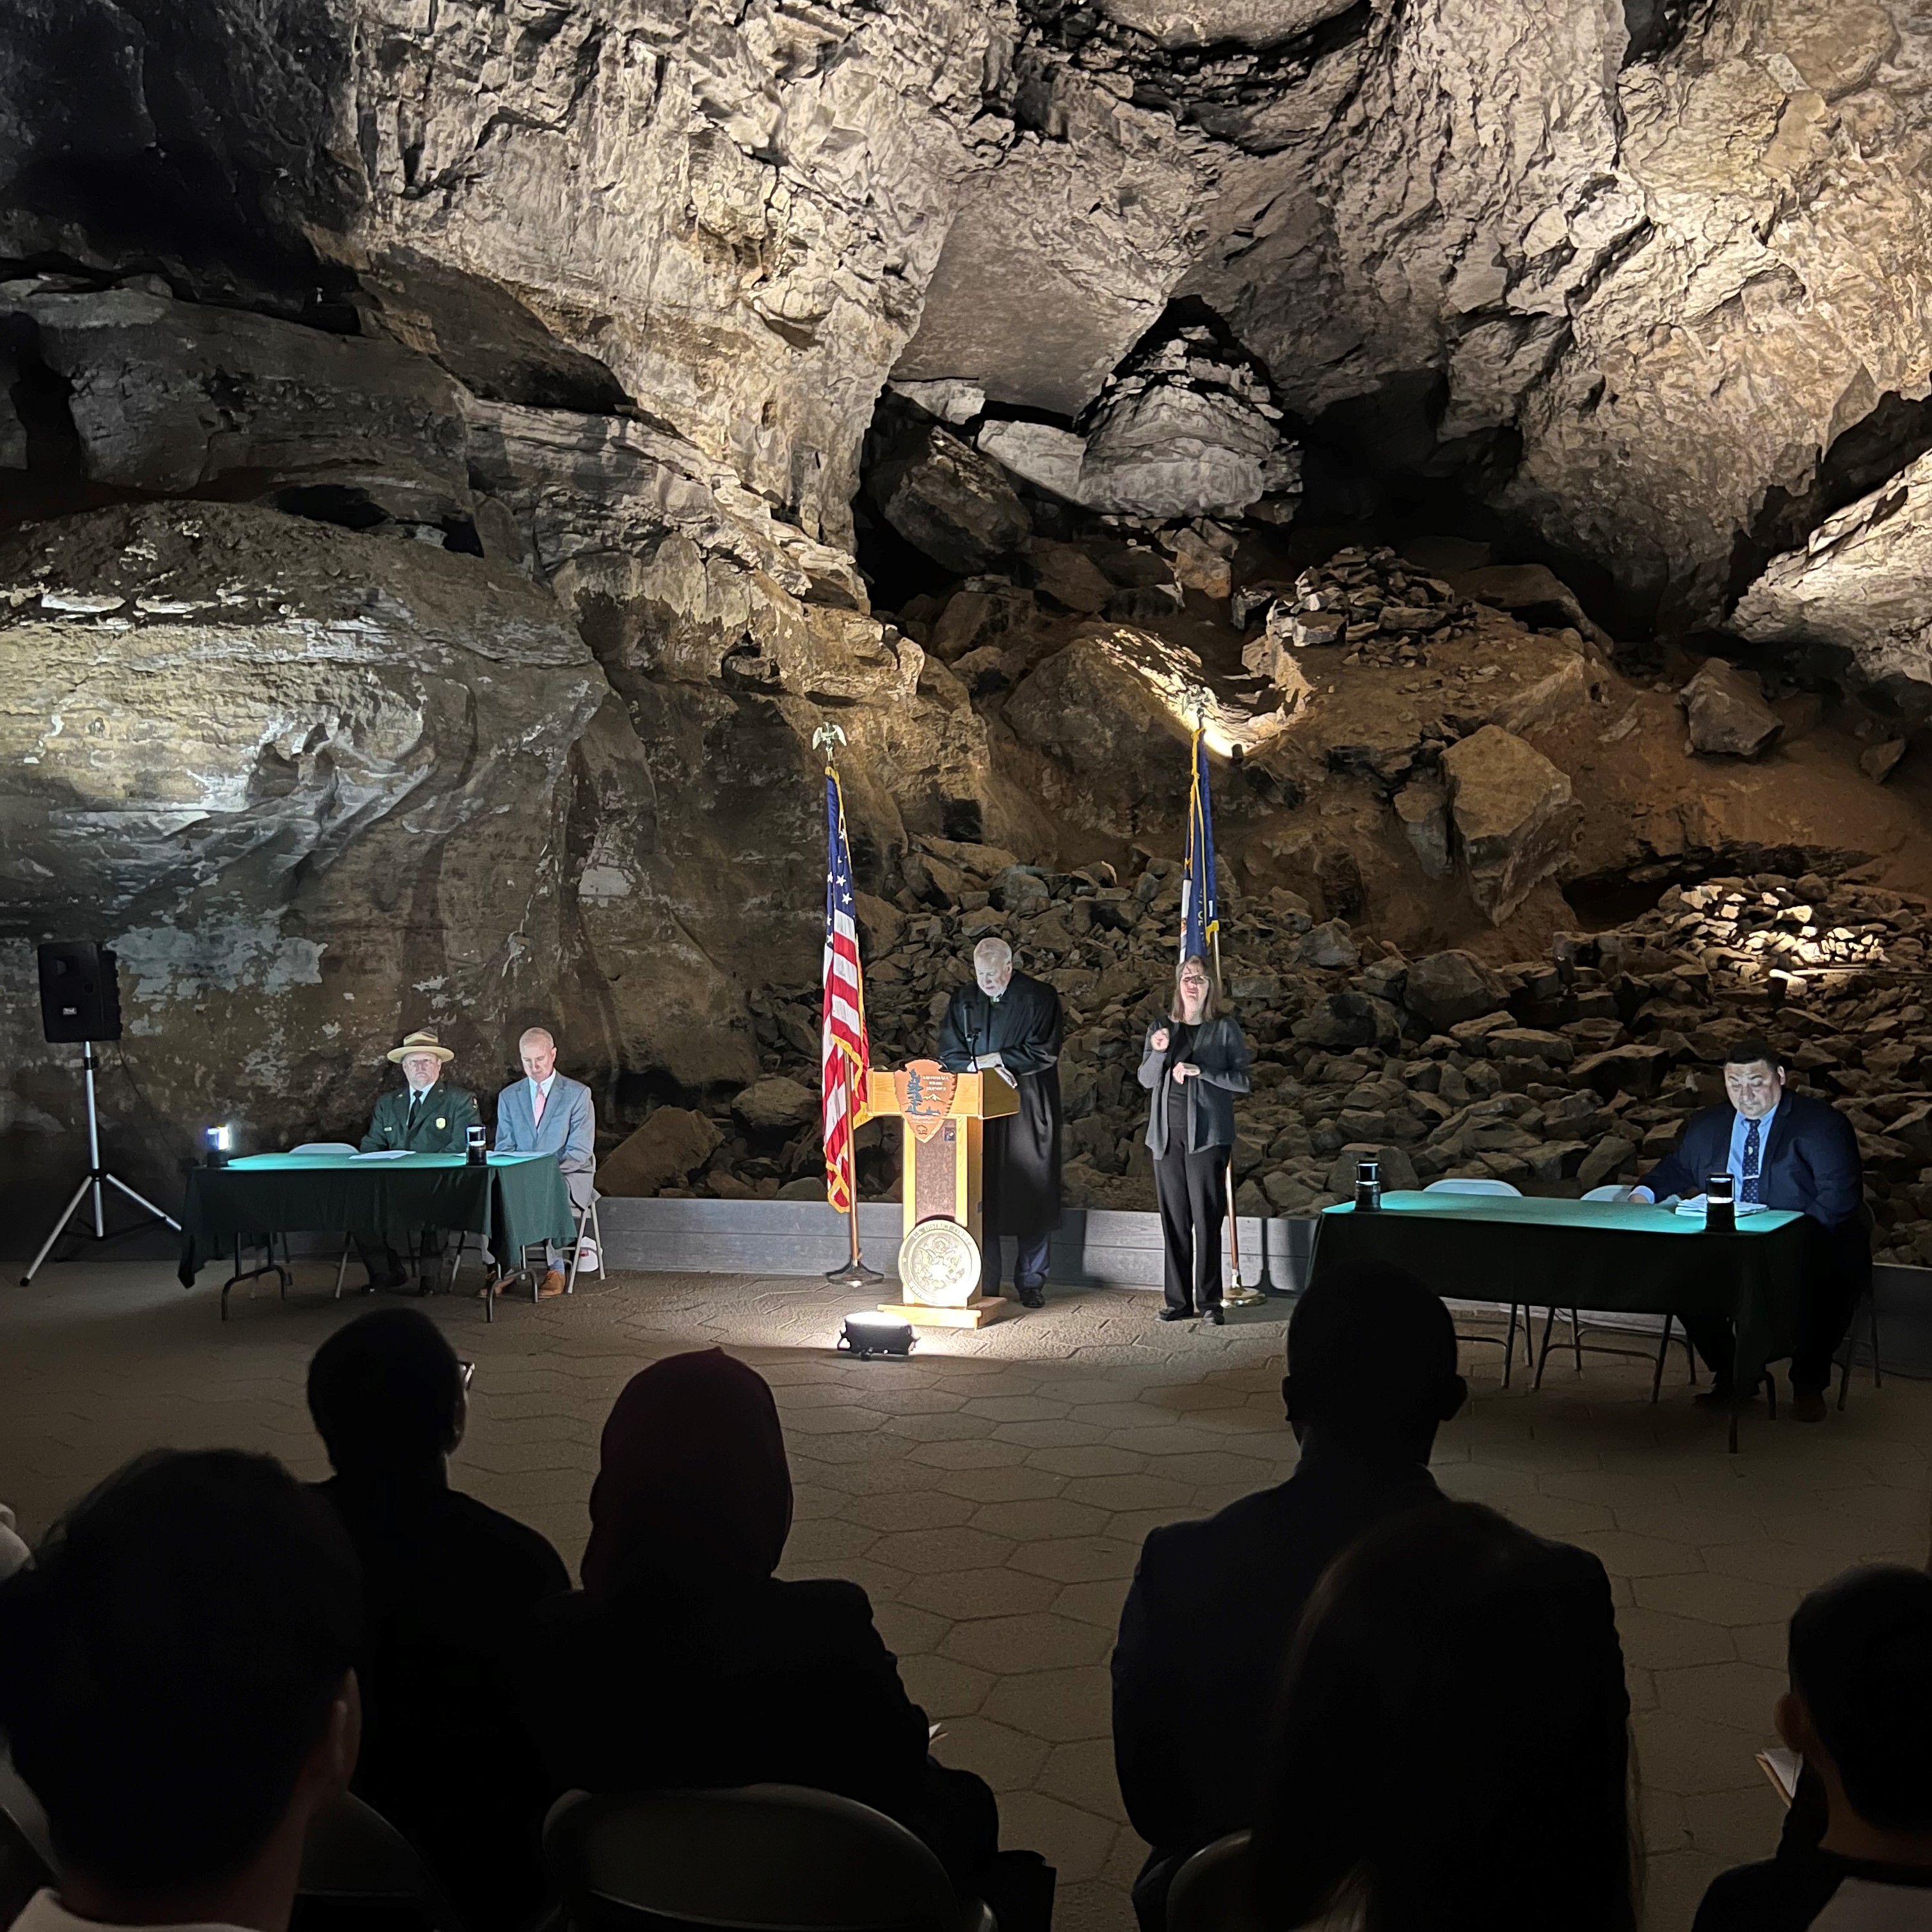 A judge wearing a black robe stands behind a podium and next to the American and Kentucky state flag in a rocky cave.